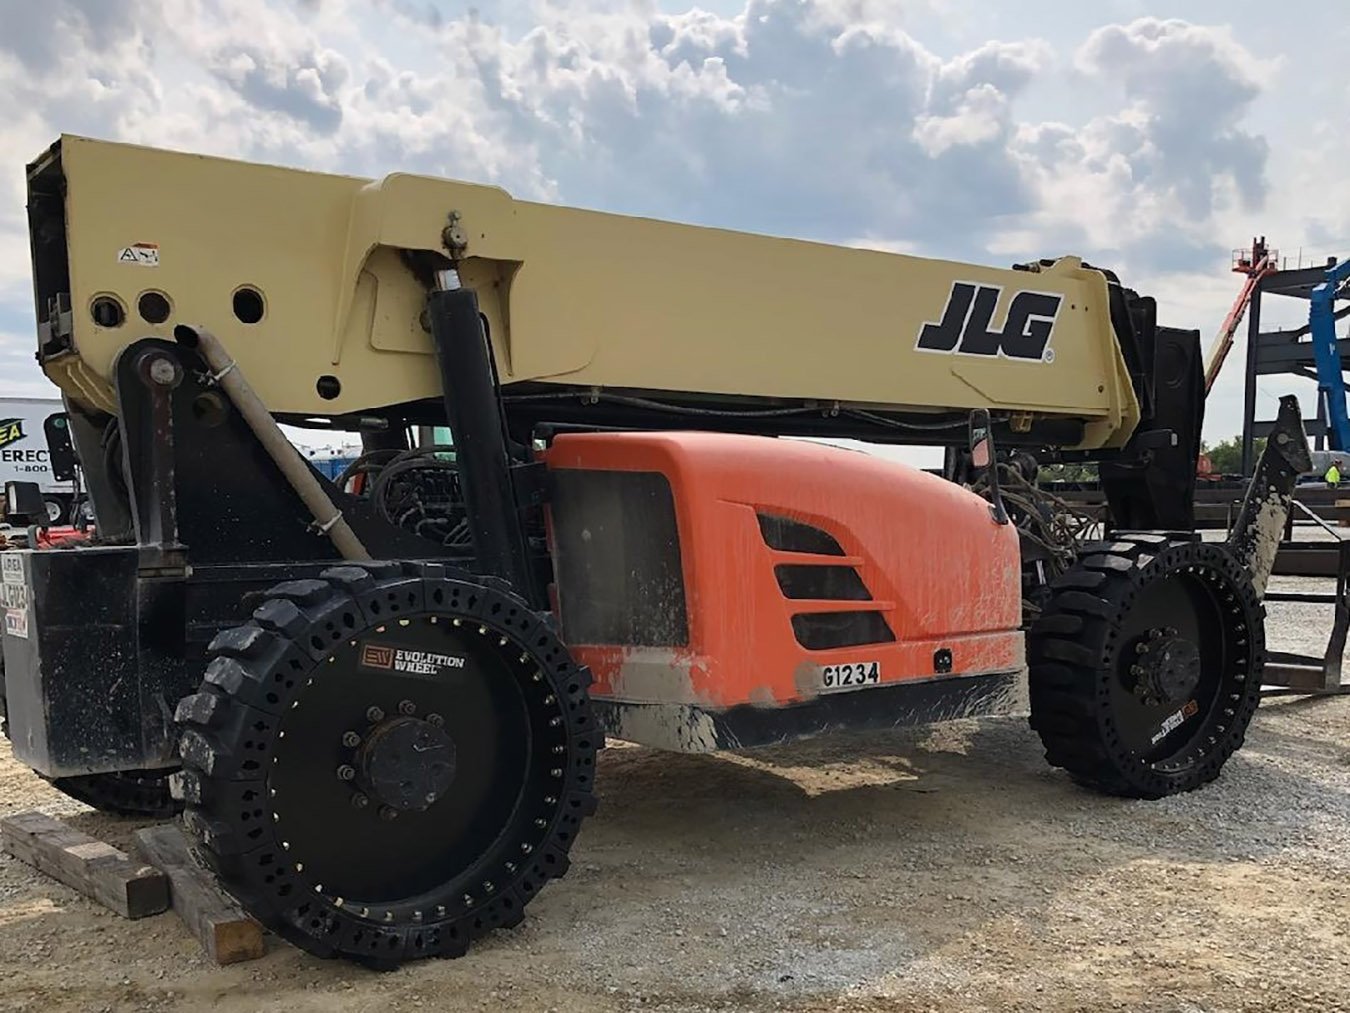 This image shows our telescopic forklift tires on a JLG telehandler